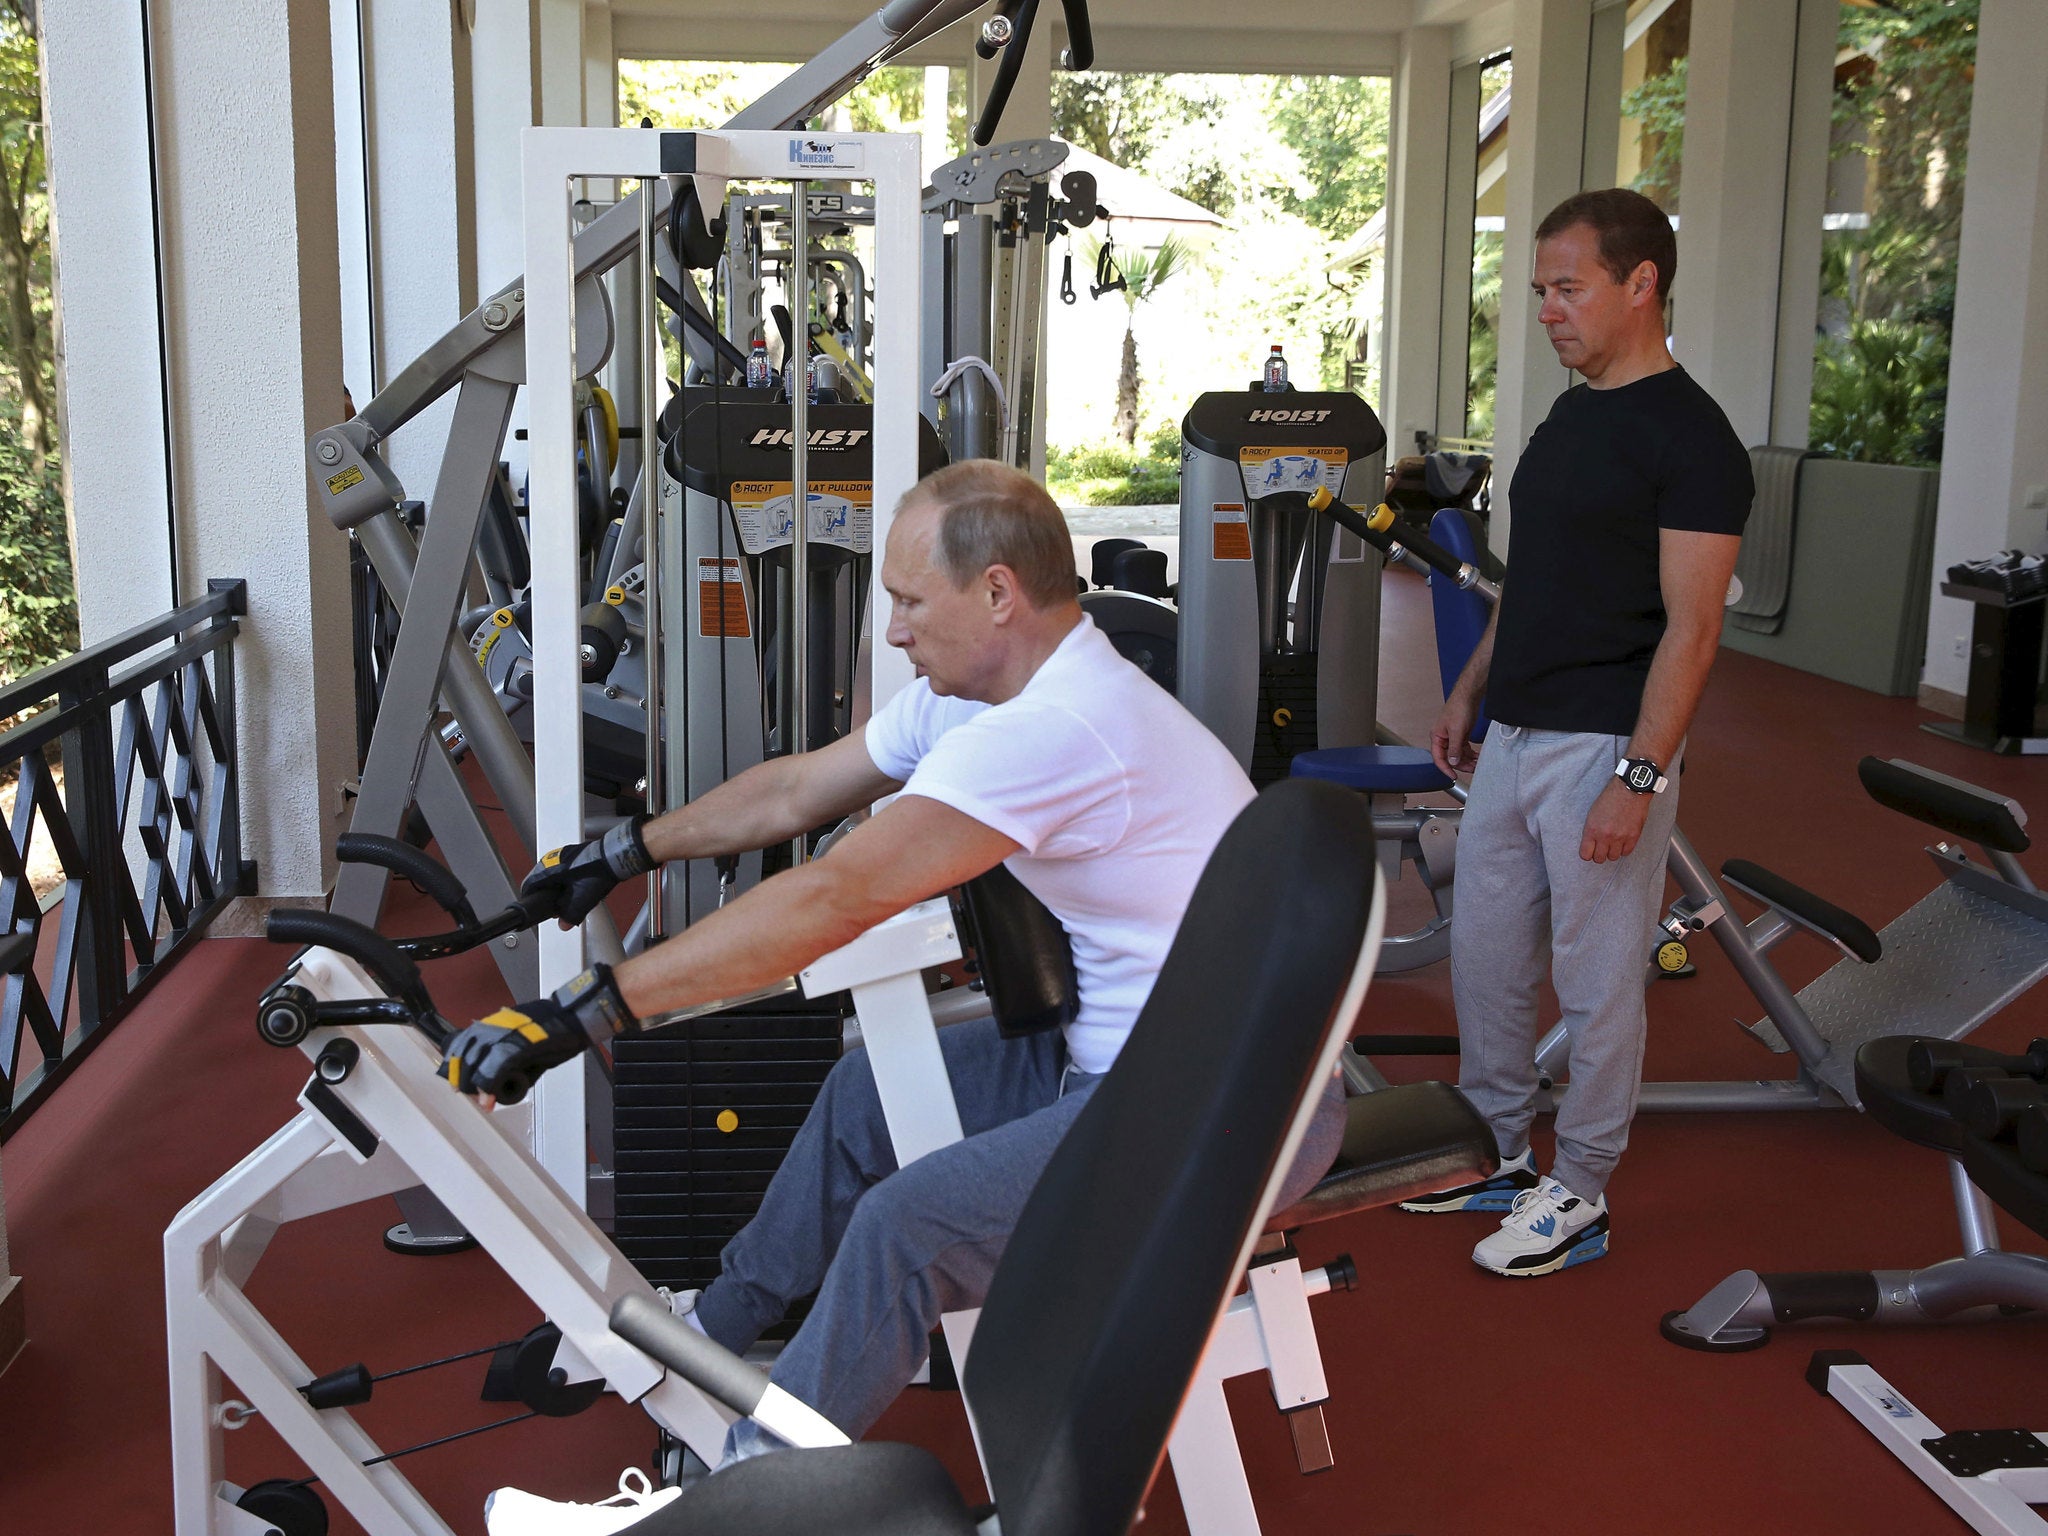 Putin and Medvedev hit the gym